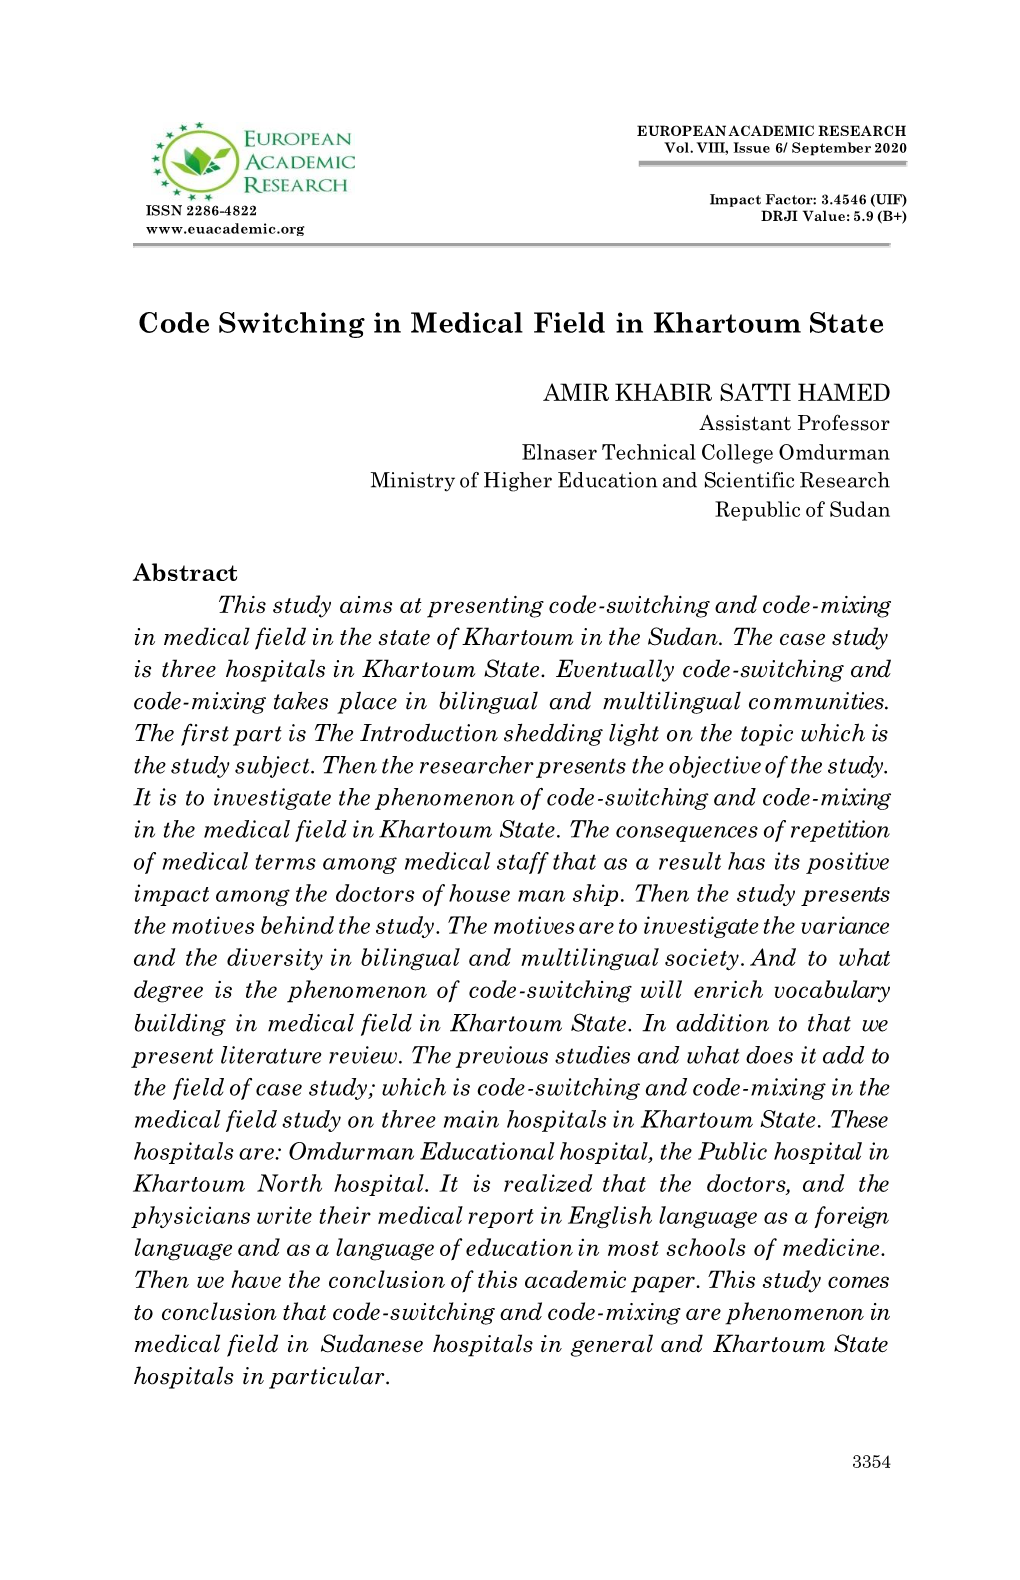 Code Switching in Medical Field in Khartoum State